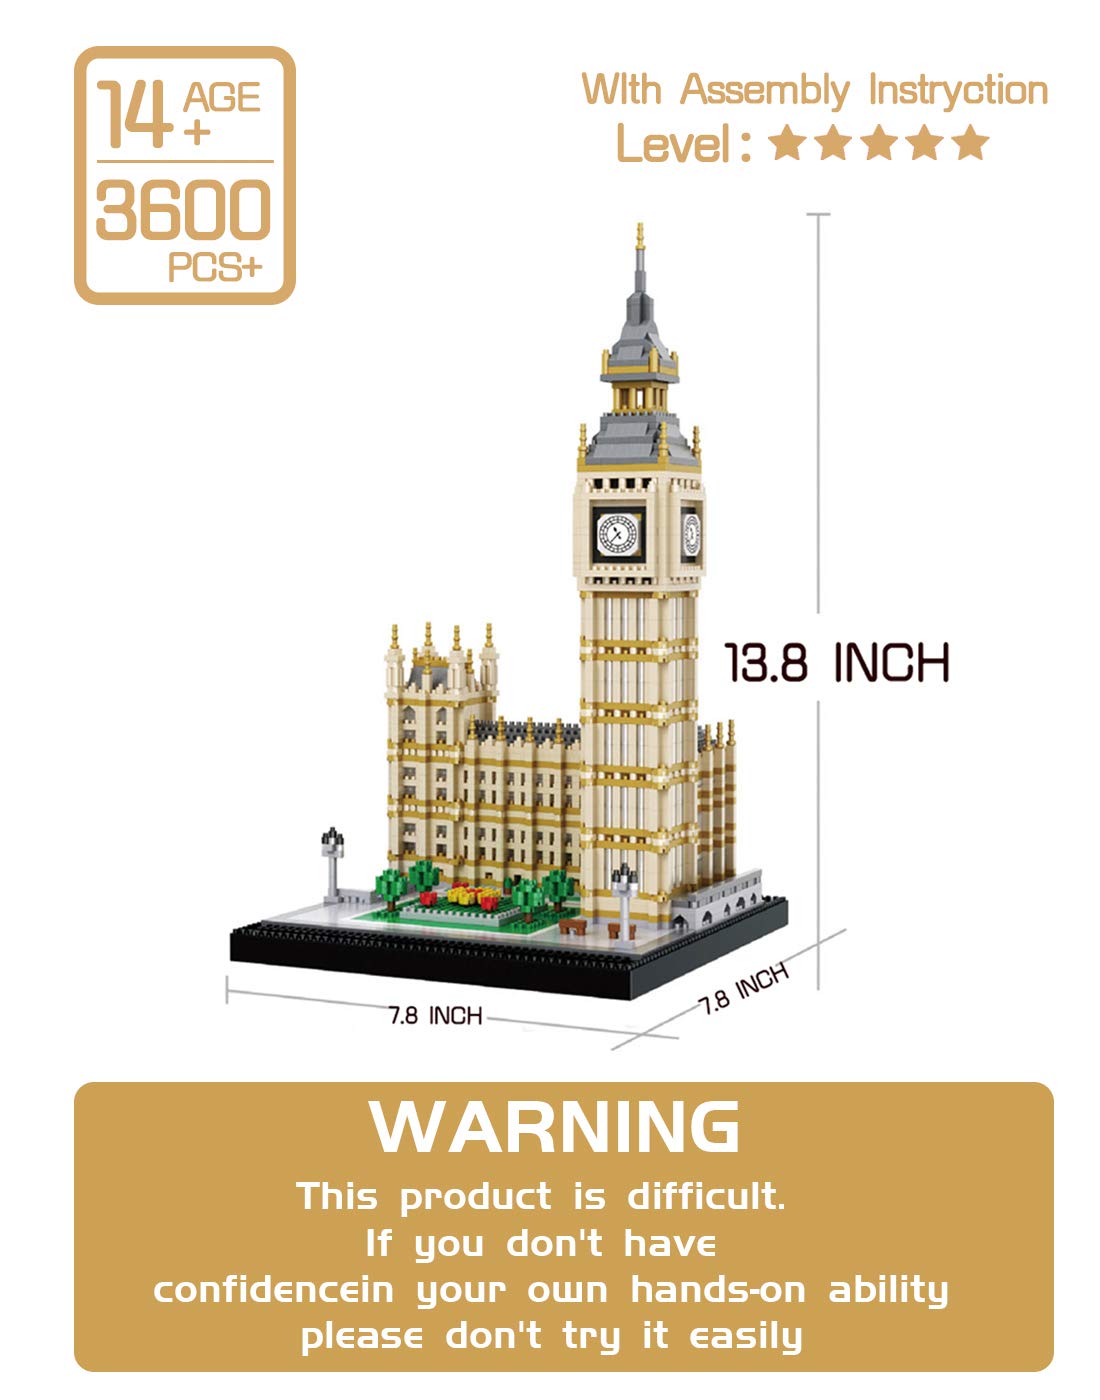 dOvOb Real Big Ben Micro Building Blocks Set (3600PCS) - World Famous Architectural Model Toys Gifts for Kid and Adult